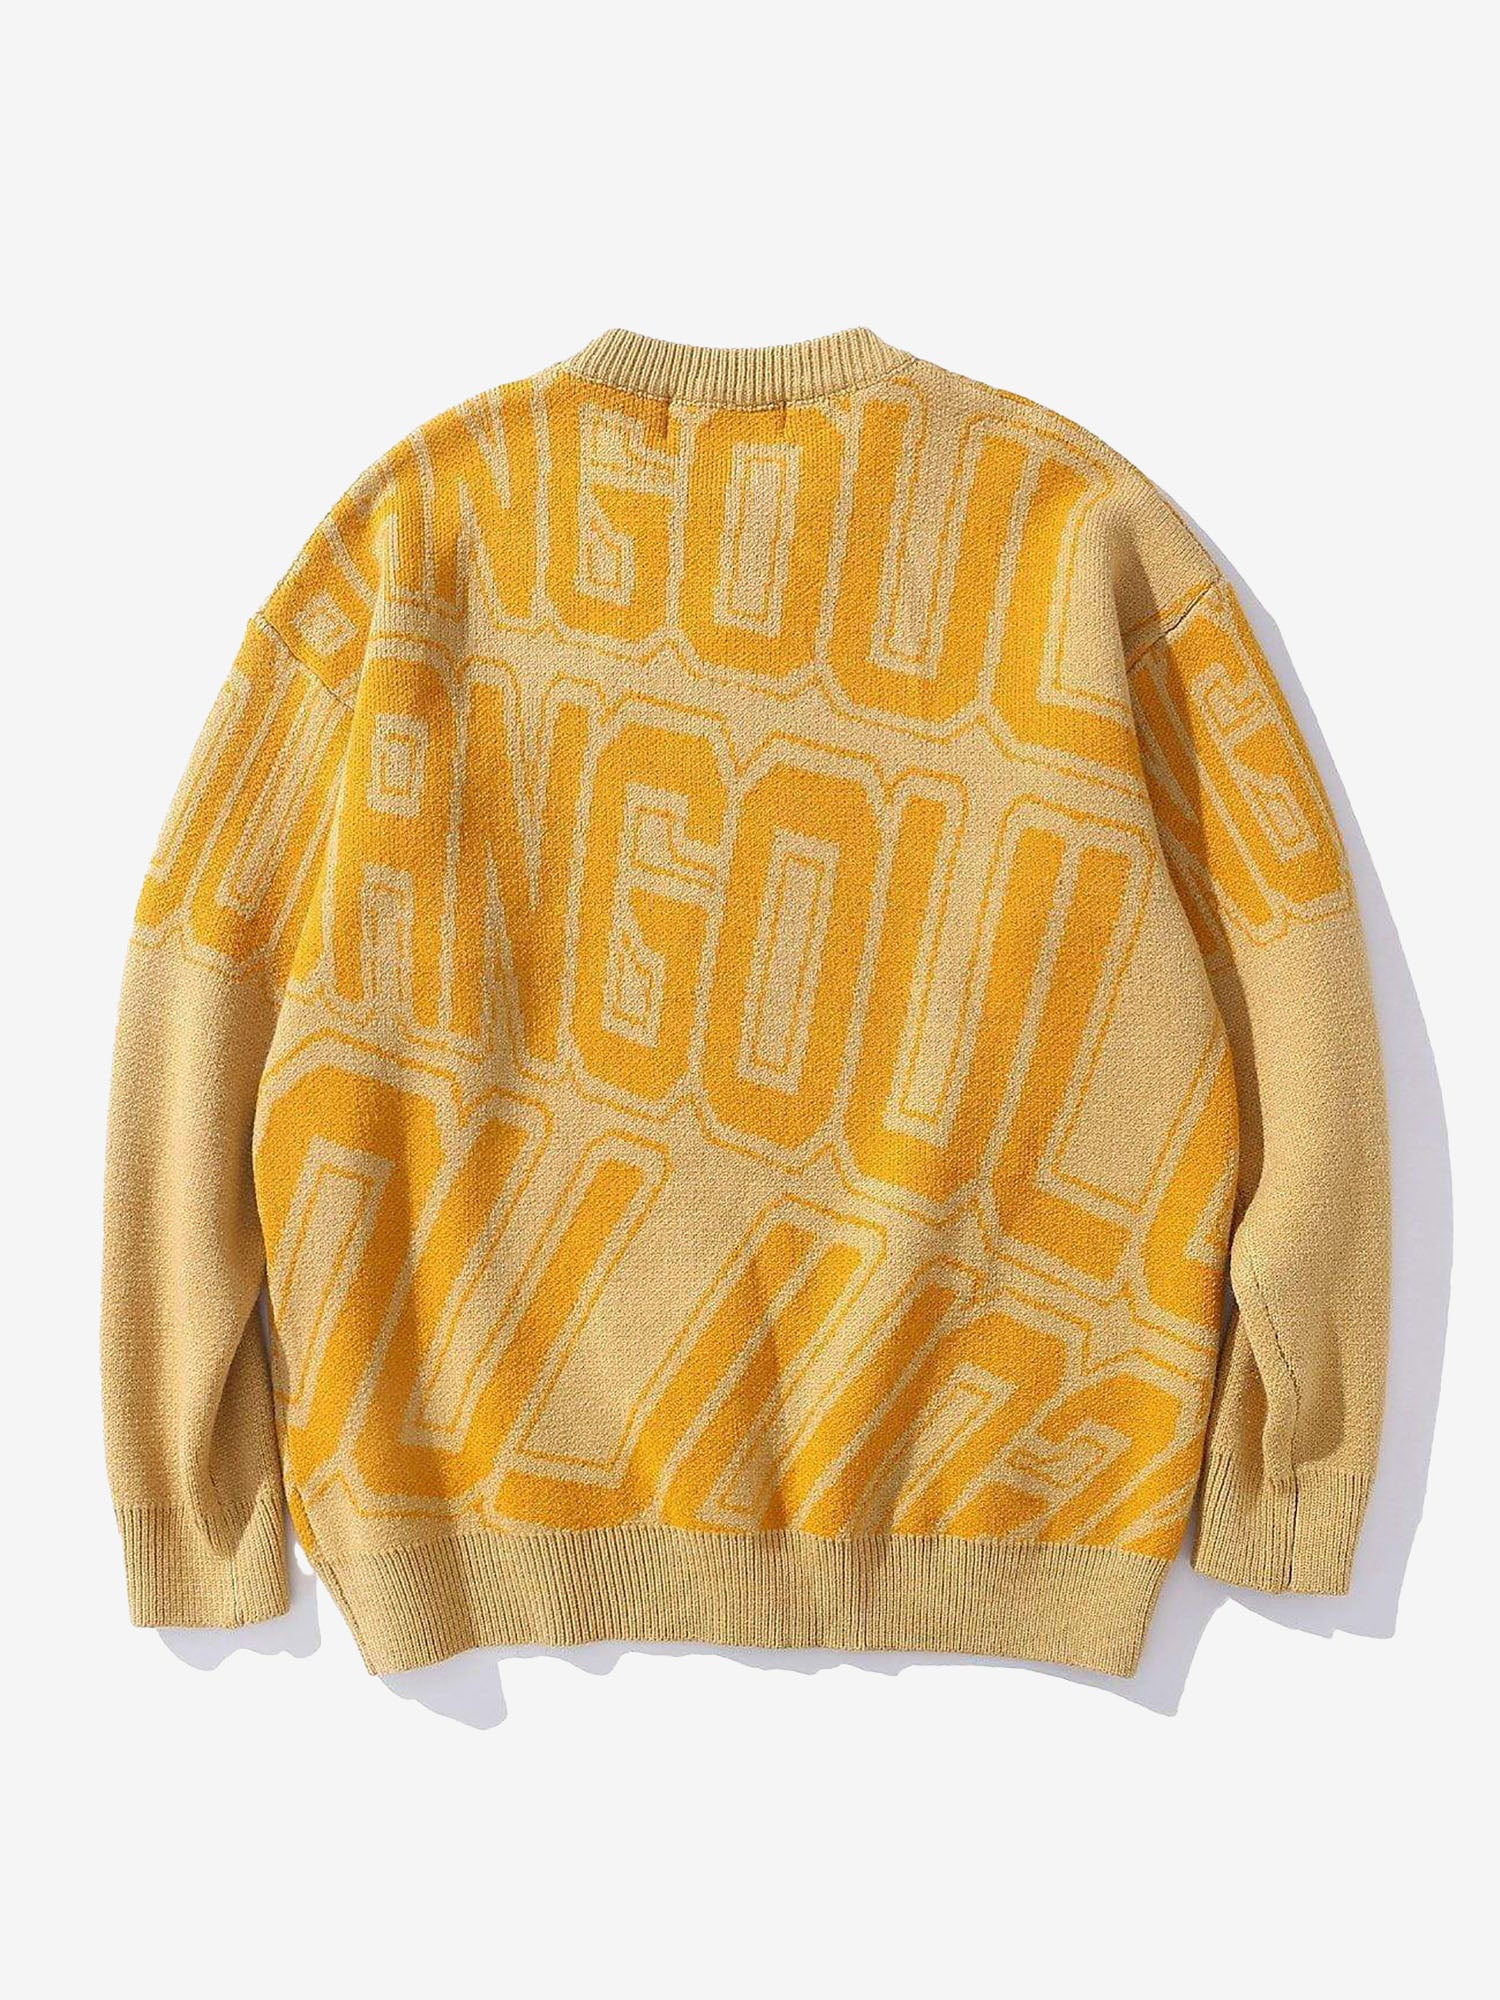 Yellow Vintage Fully Printed Knitted Sweater for men's